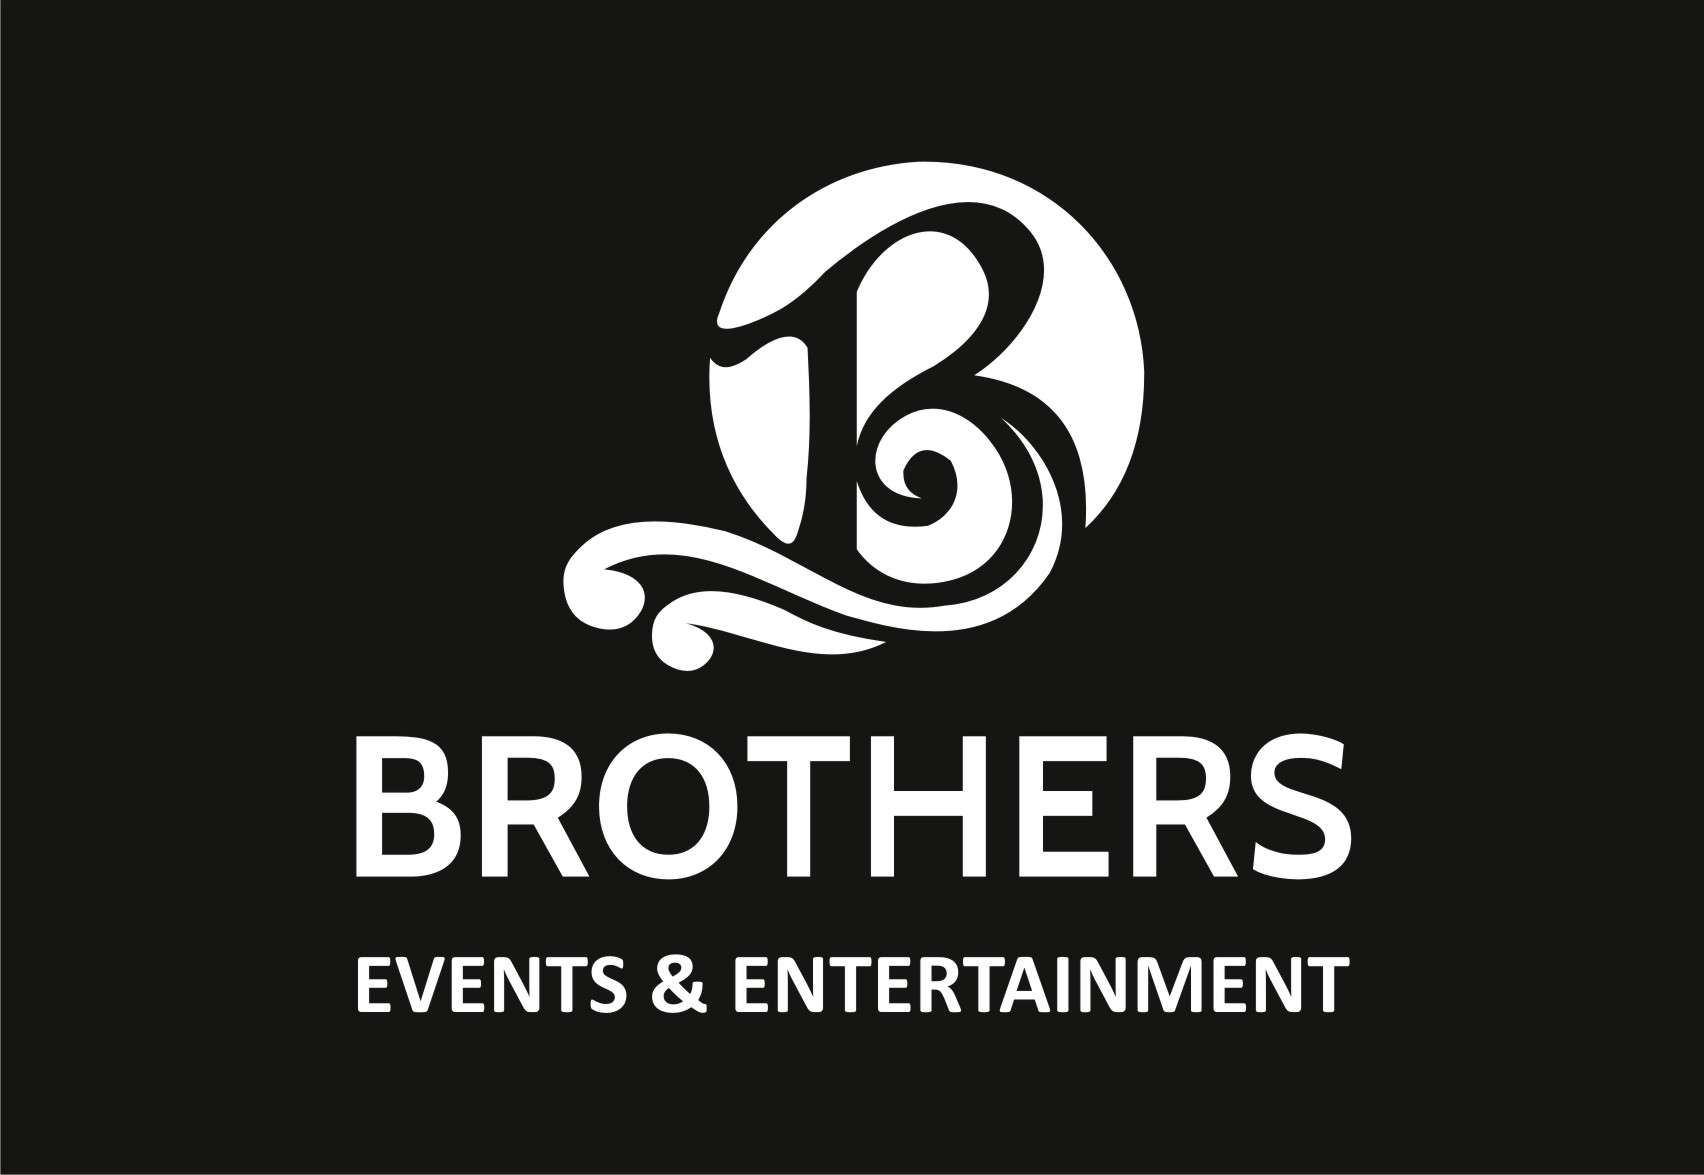 Brothers Events & Entertainment